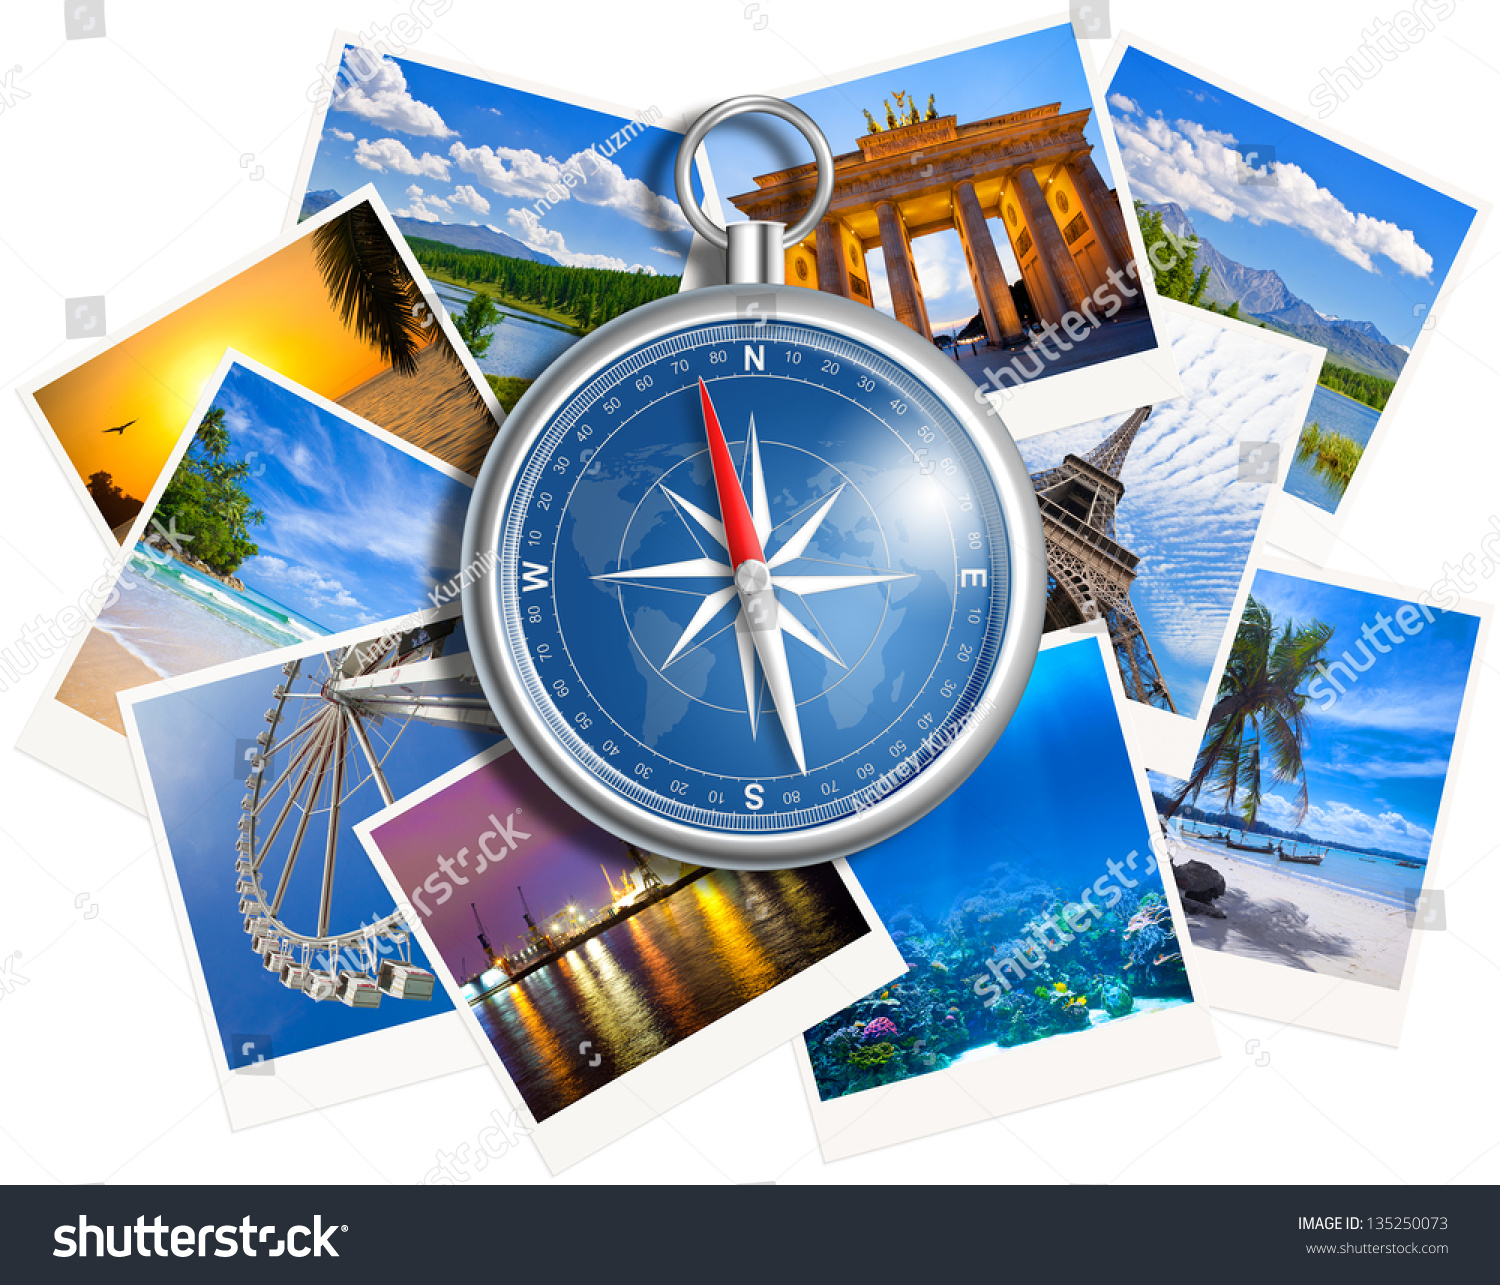 Traveling photos collage with compass isolated on white background #135250073